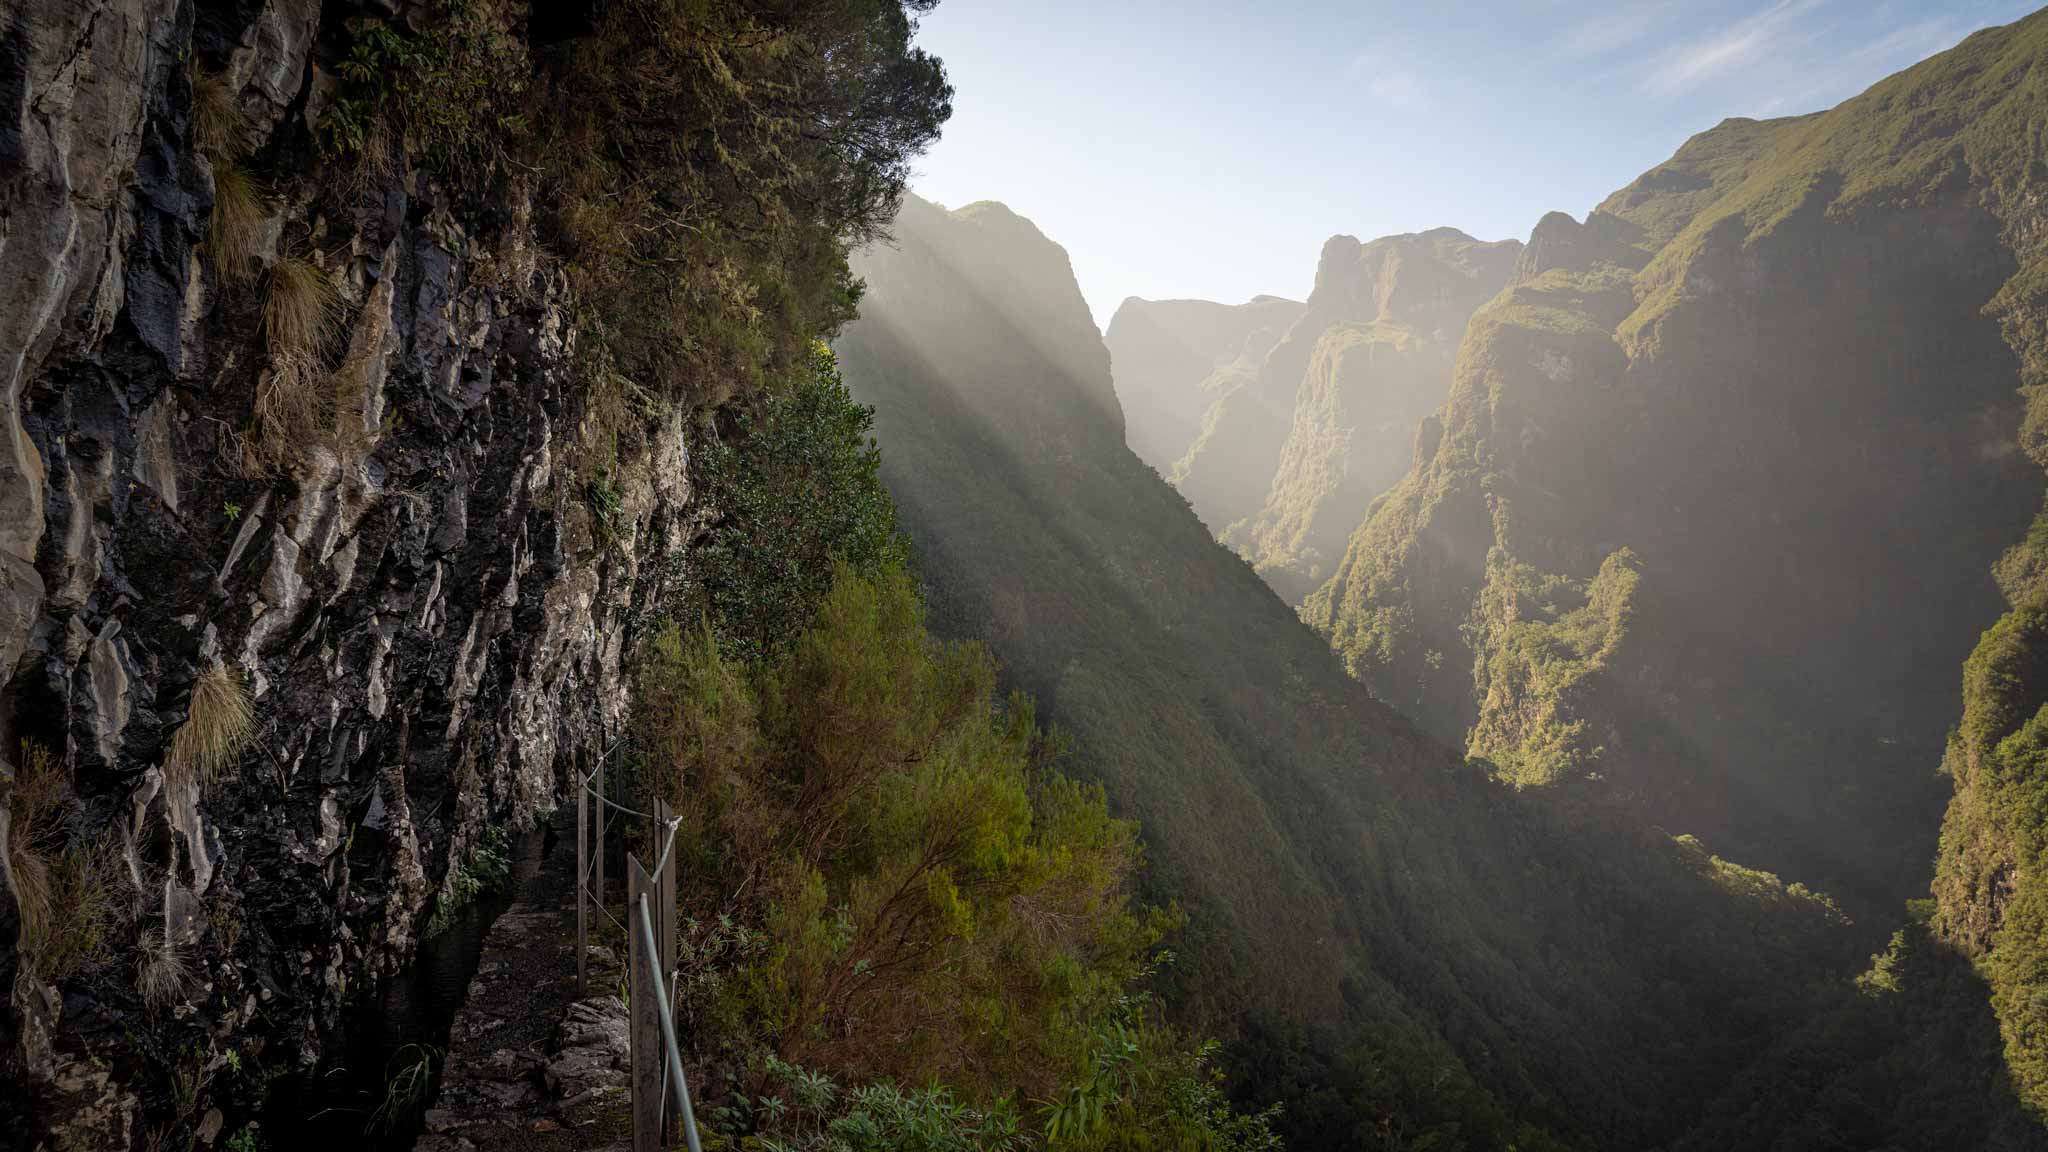 Rays of sun beam across the mountains and the Levada do Caldeirão Verde walking path is on the left